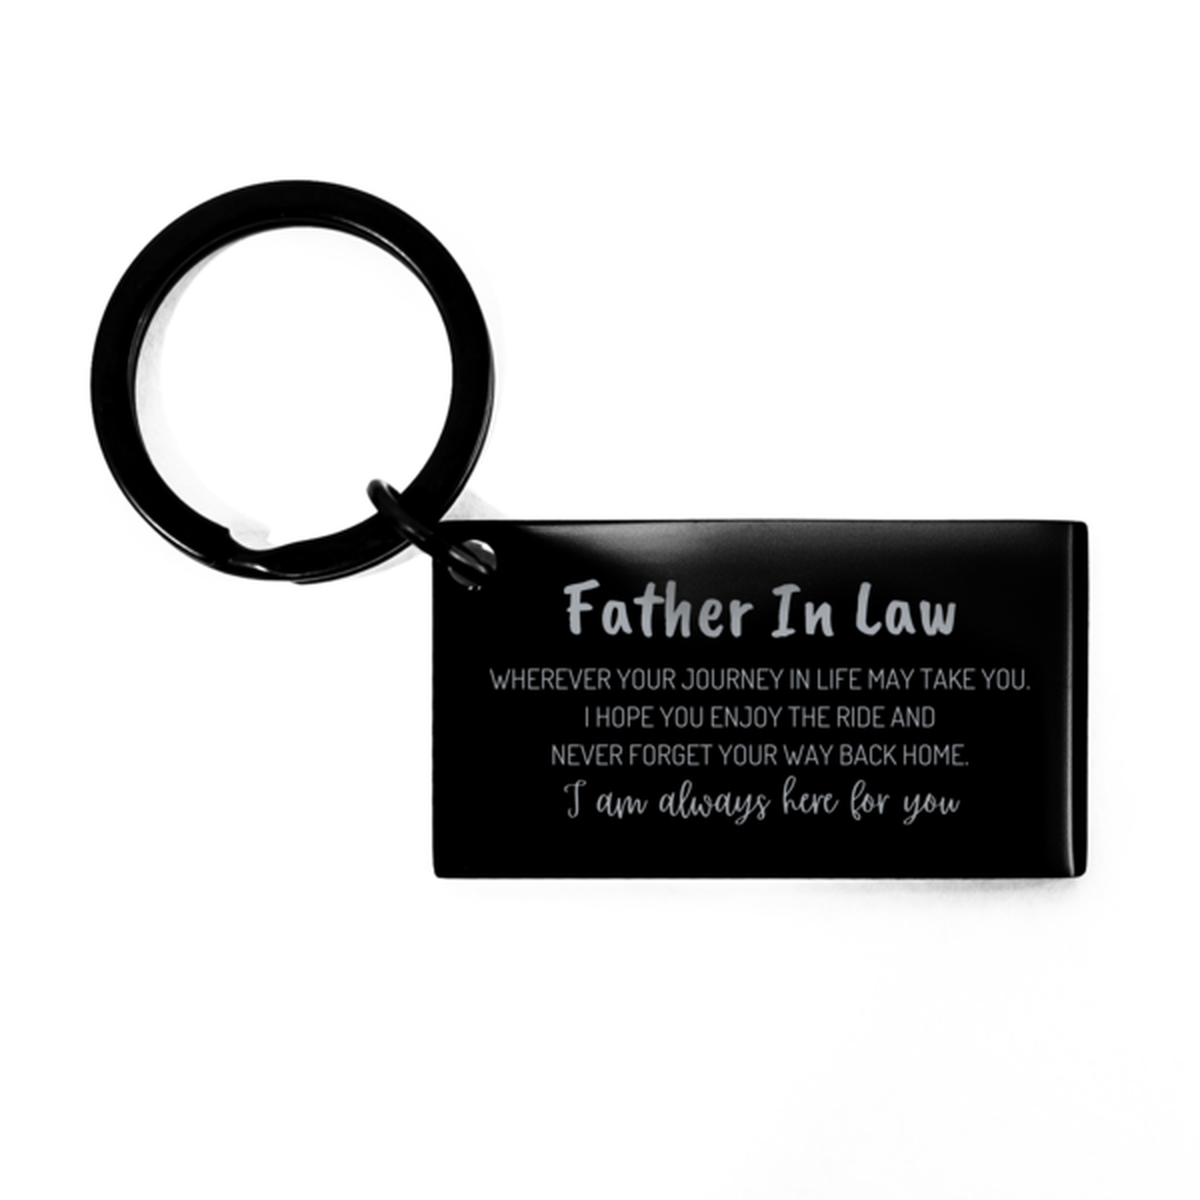 Father In Law wherever your journey in life may take you, I am always here for you Father In Law Keychain, Awesome Christmas Gifts For Father In Law, Father In Law Birthday Gifts for Men Women Family Loved One